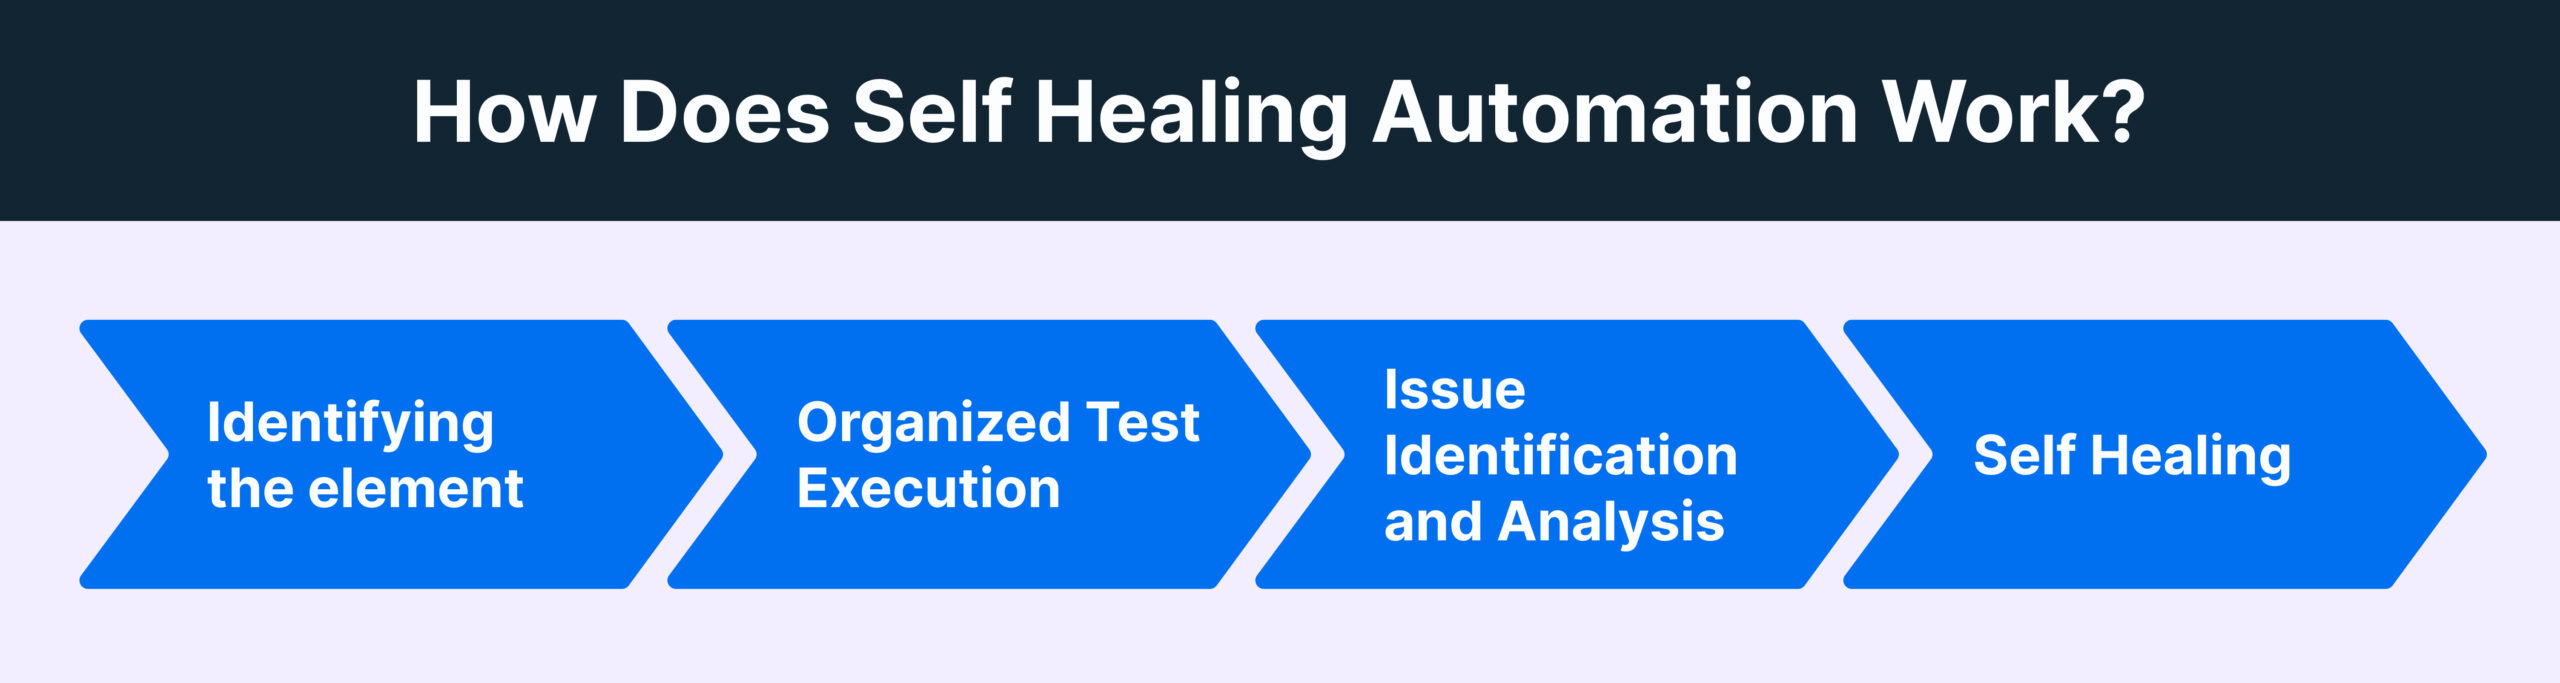 How Does Self Healing Automation Work